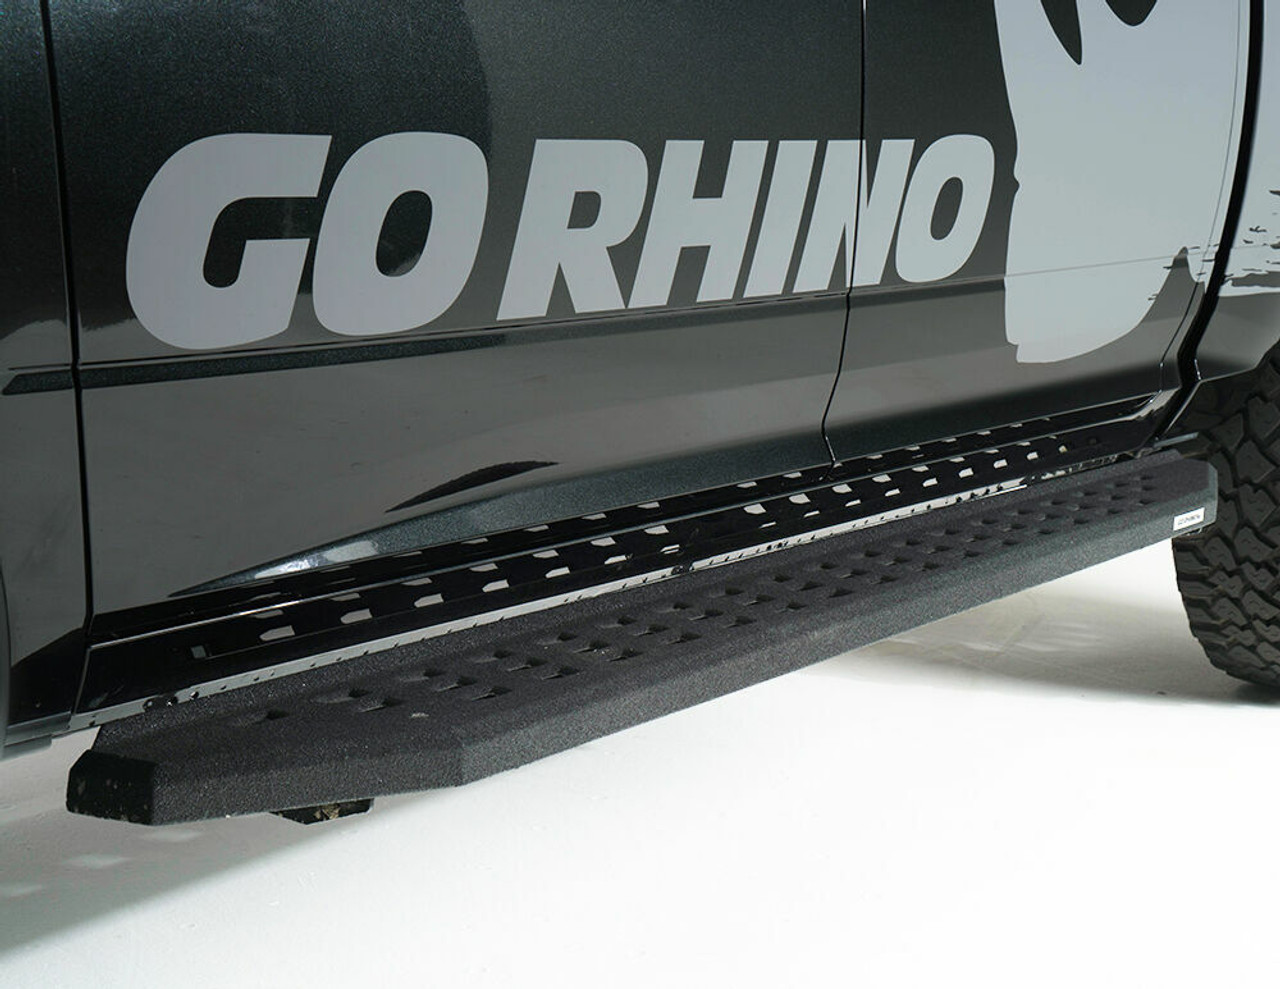 Go Rhino 69415587PC Ford, F-150 Raptor, 2017 - 2021, RB20 Running boards - Complete Kit: RB20 Running boards + Brackets, Galvanized Steel, Textured black, 69400087PC RB20 + 6941555 RB Brackets